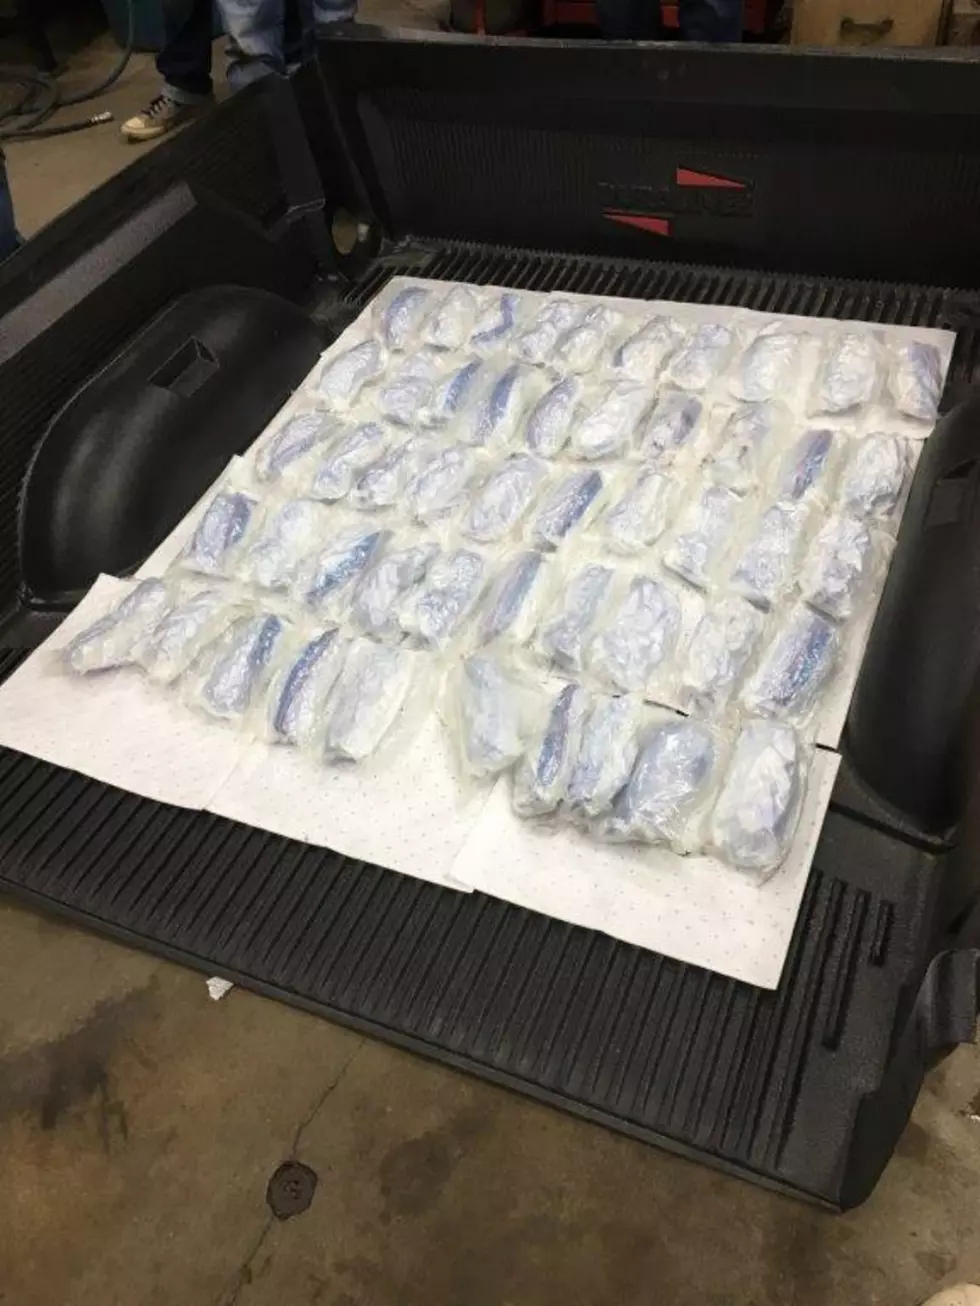 5 Years For 55 Pounds of Meth From Rochester Drug Bust